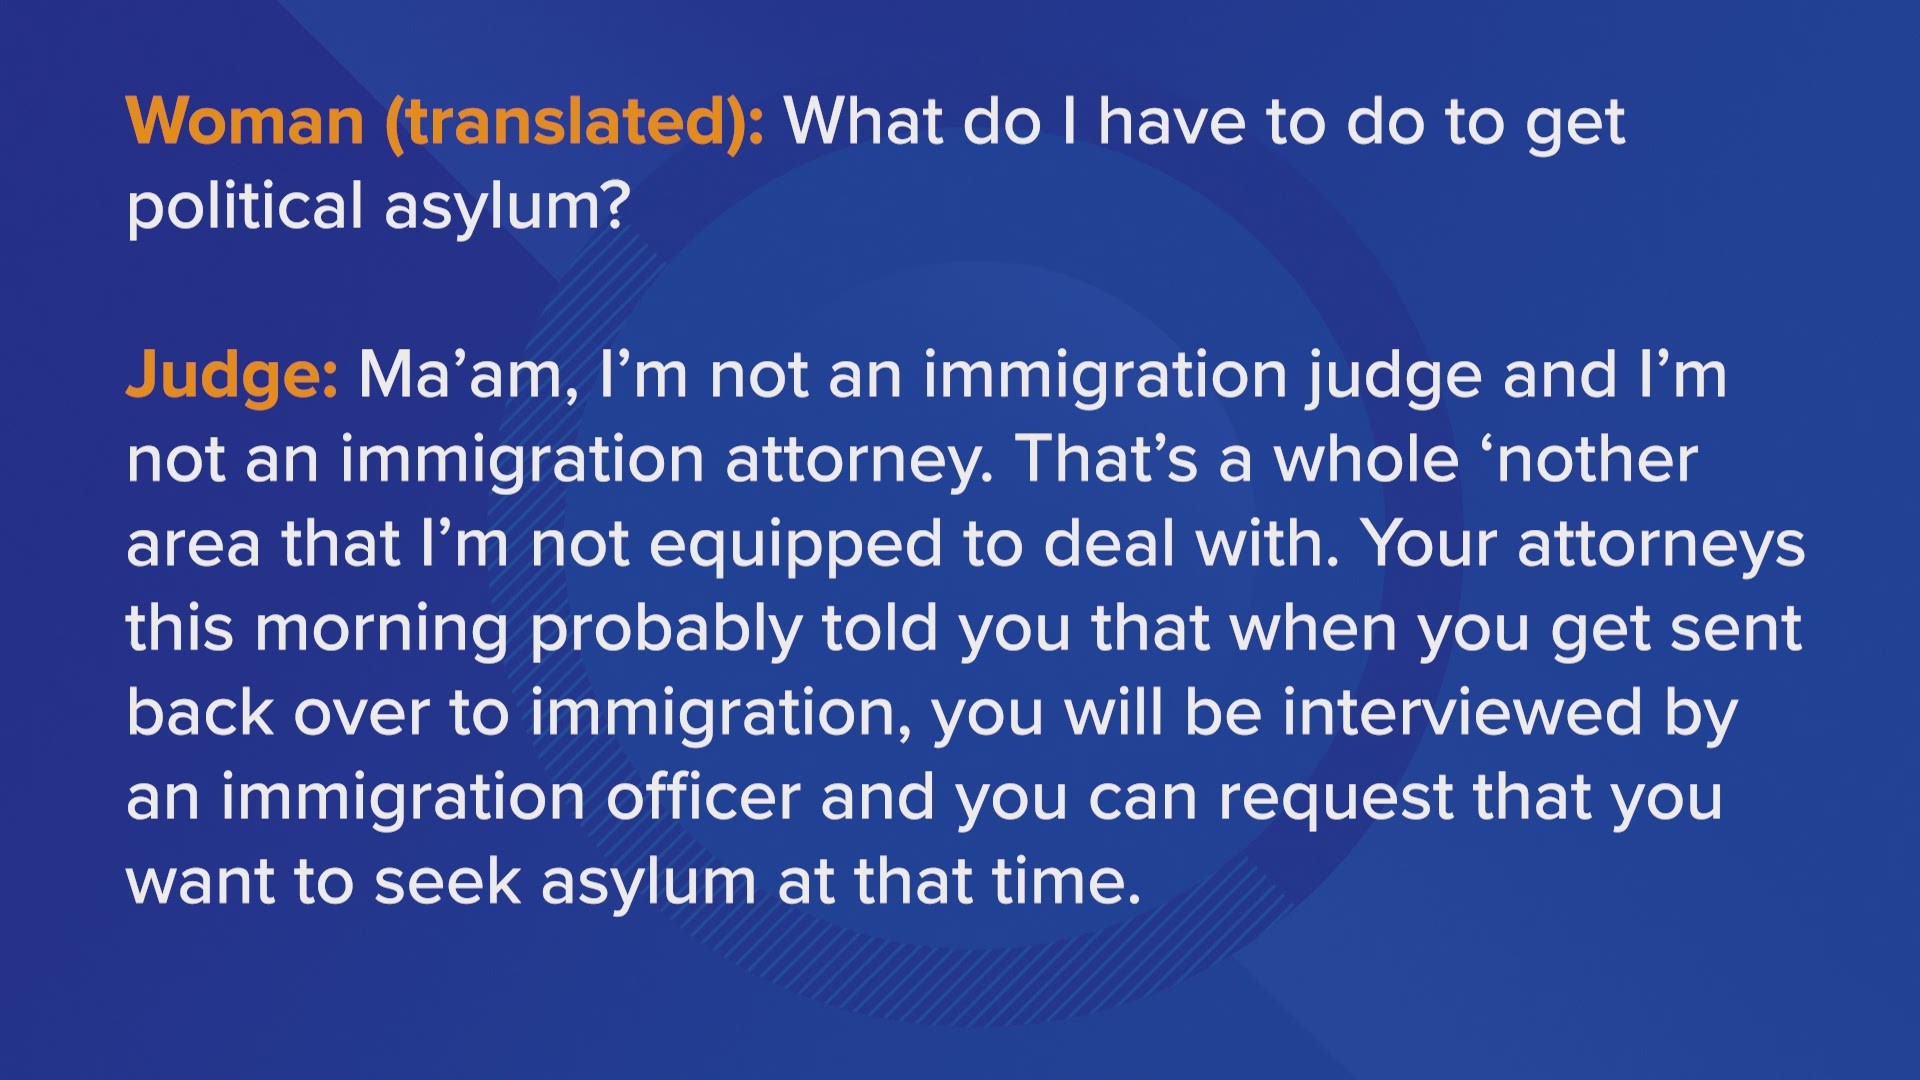 Some seemed confused about the asylum process during a federal district court hearing in McAllen, Texas October 1, 2018.